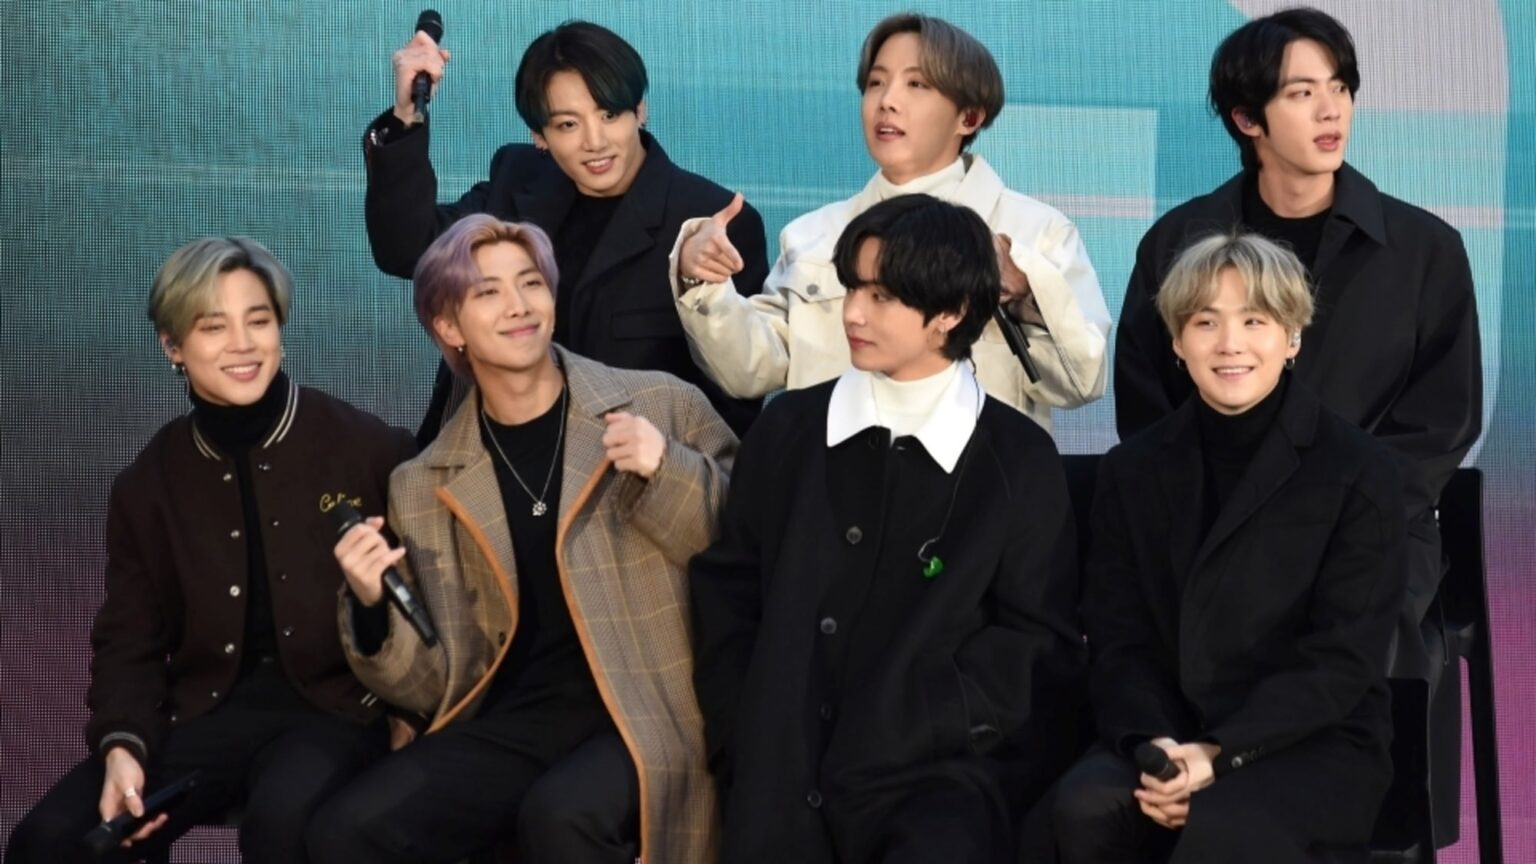 BTS has had a lucrative 2020. Find out whether the members of the K-pop group are in relationships.